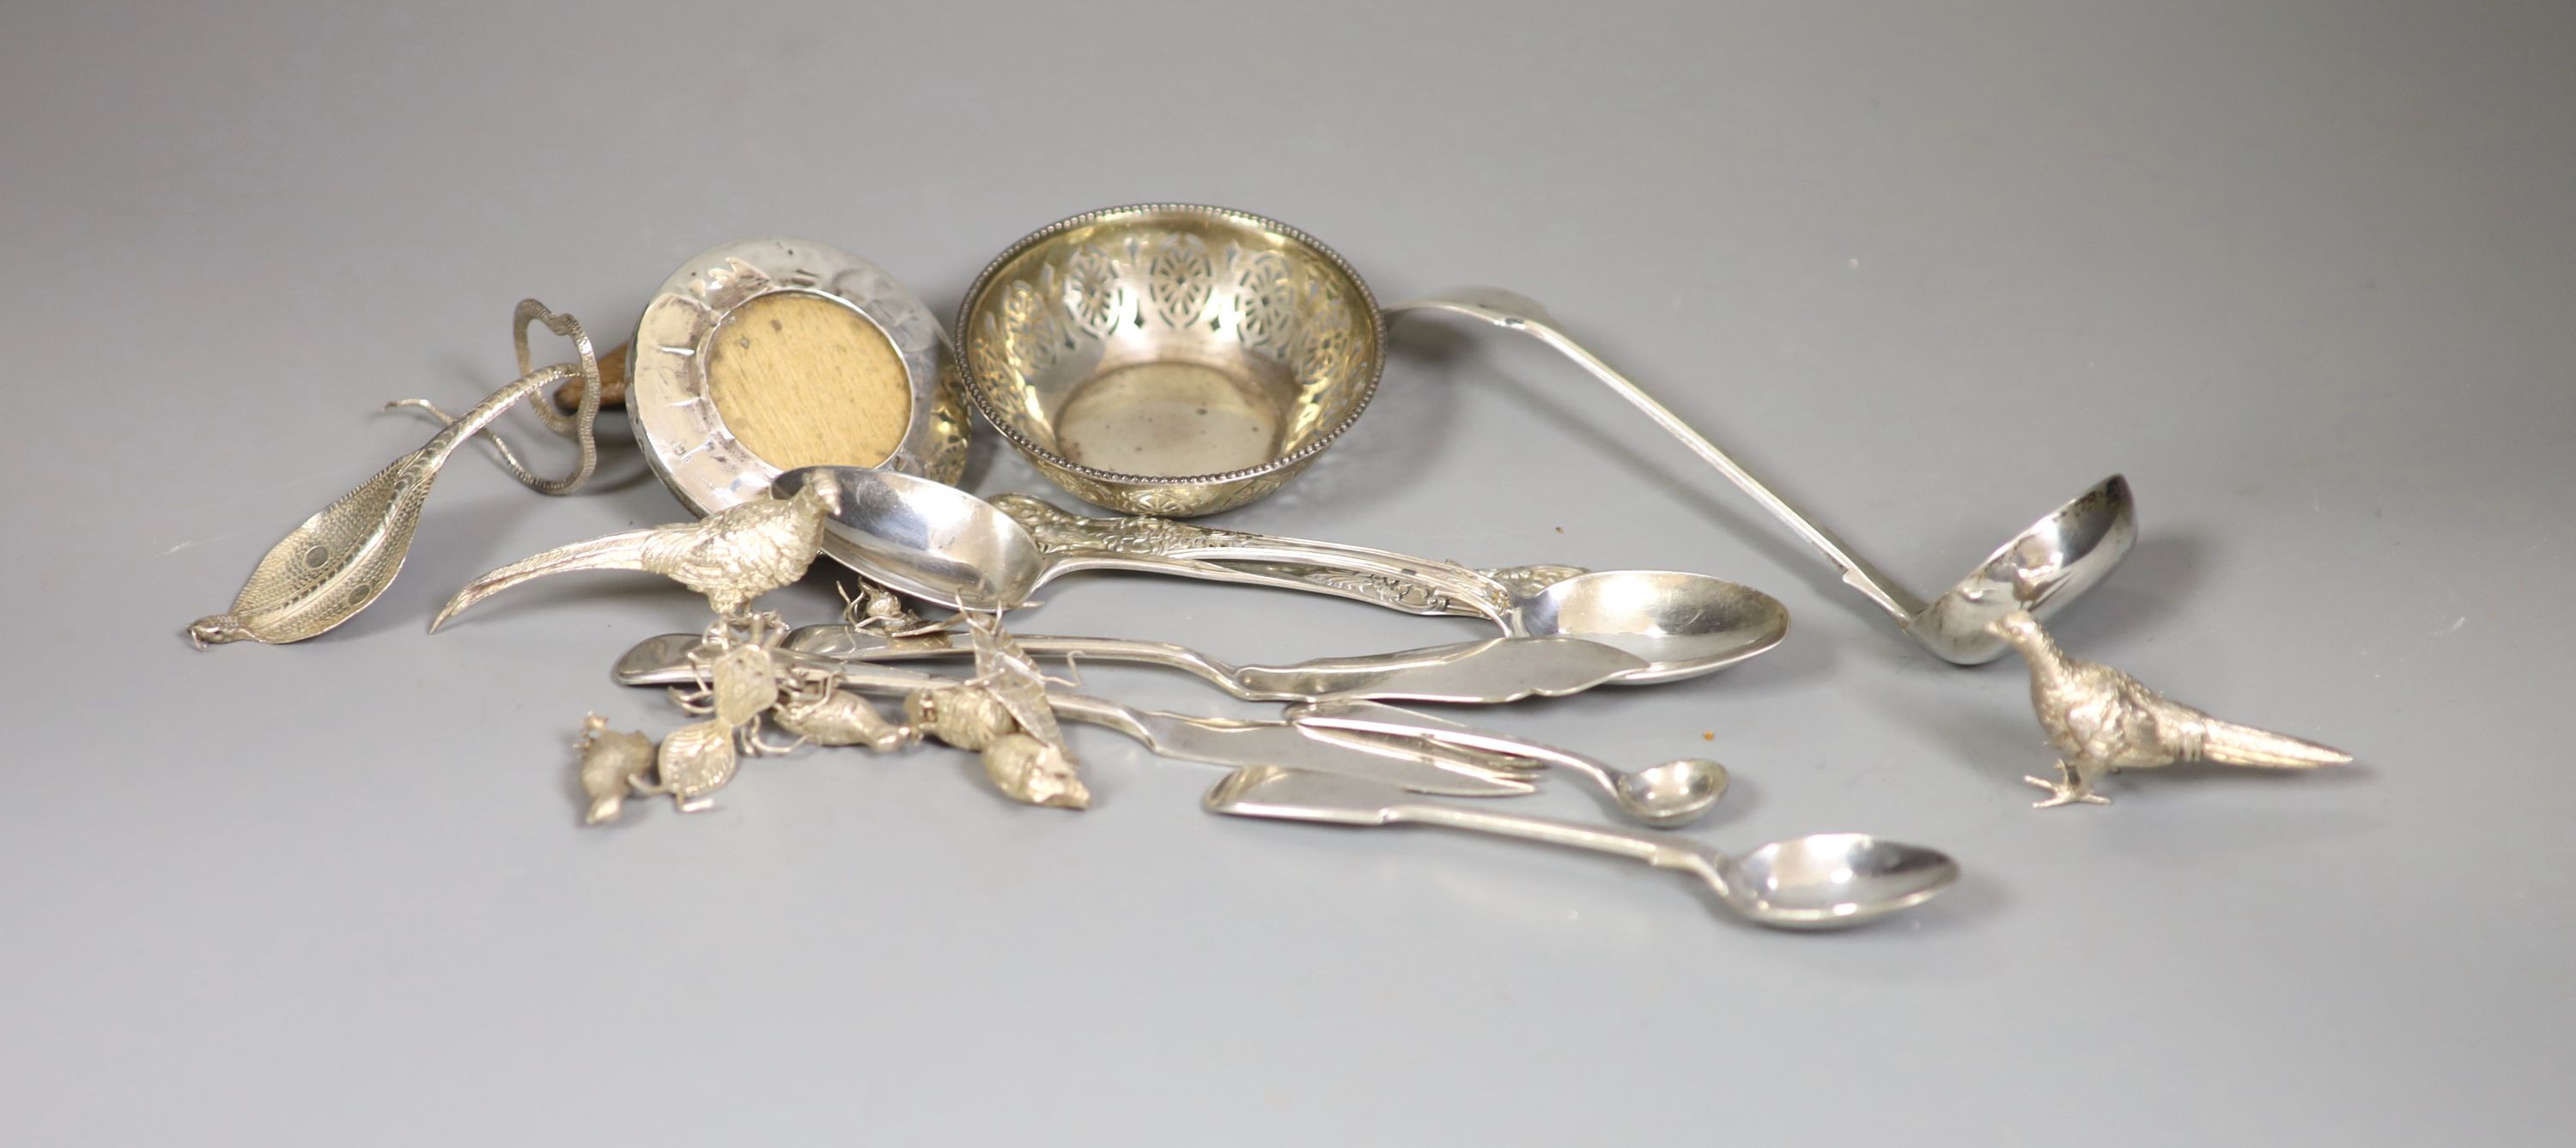 A Victorian silver fiddle pattern sauce ladle, two Victorian Scottish silver teaspoons, a pierced silver small bowl, small silver mounted photograph frame and thirteen other items including silver plated miniature animal